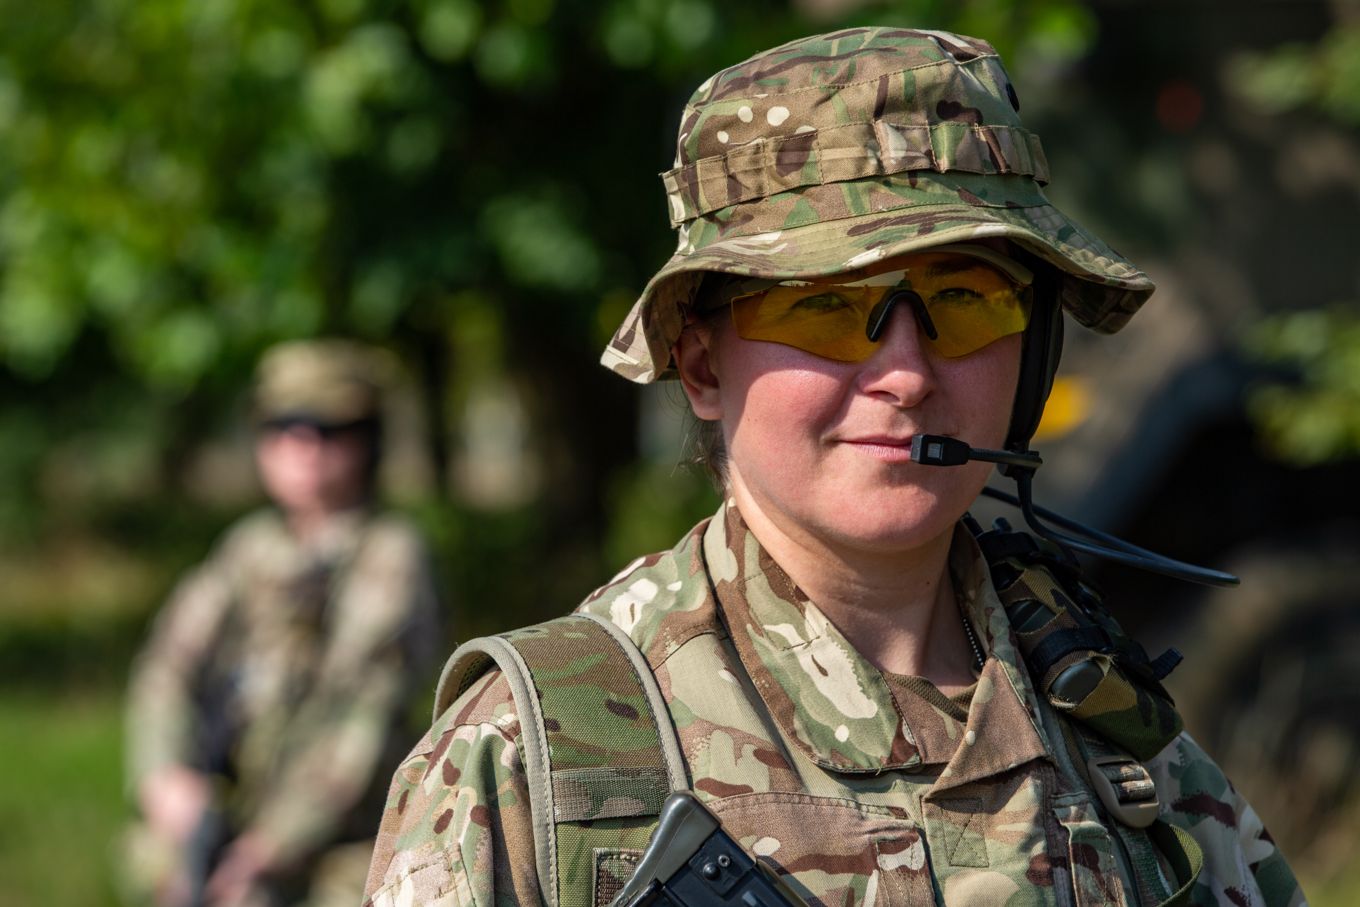 SAC Ashleigh Wandless on patrol duties during Exercise Resolute Convoy